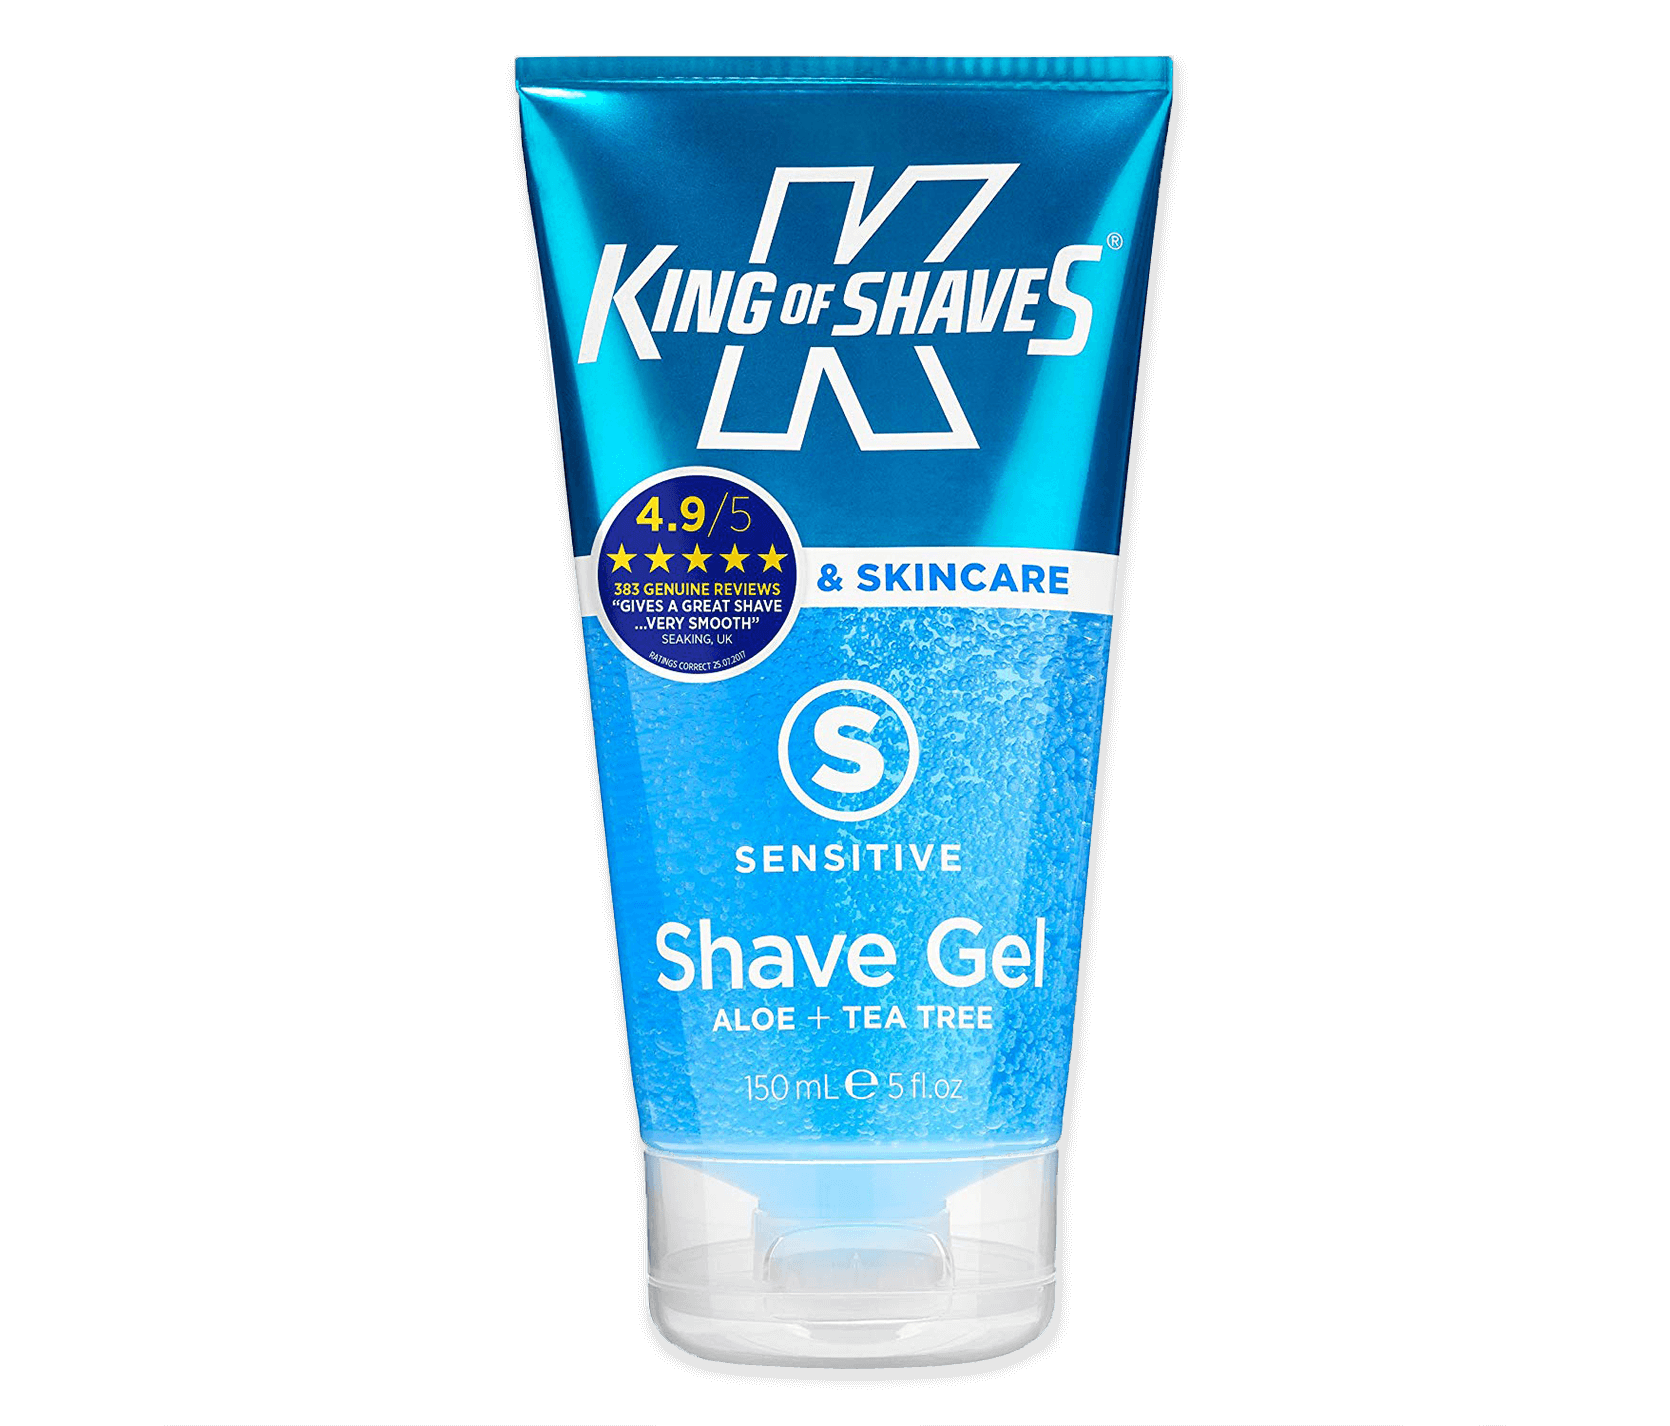 King-of-Shaves - Case Study